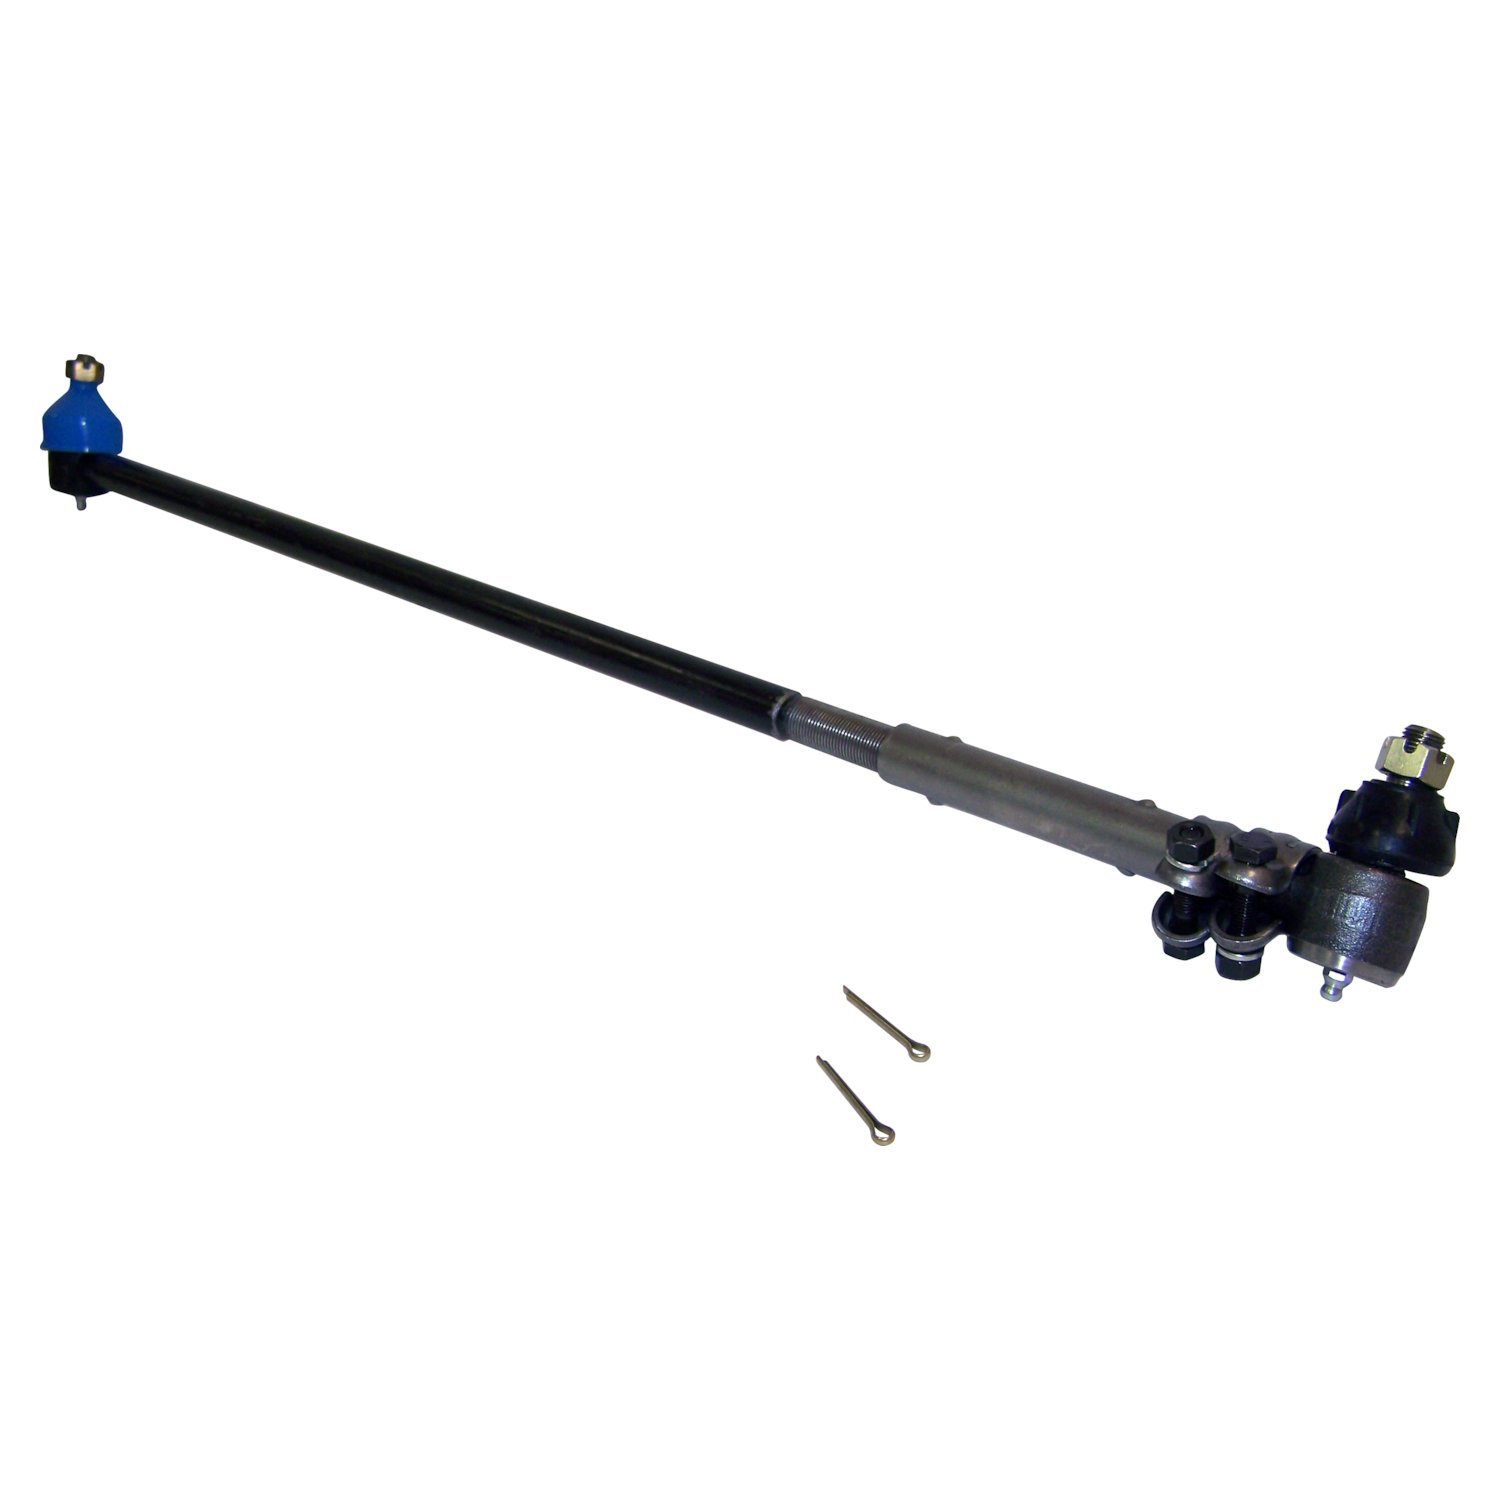 Drag Link Assembly; At Pitman Arm; To Knuckle; 28 1/8 in.; Incl. Drag Link/Tie Rod End/Adjuster;